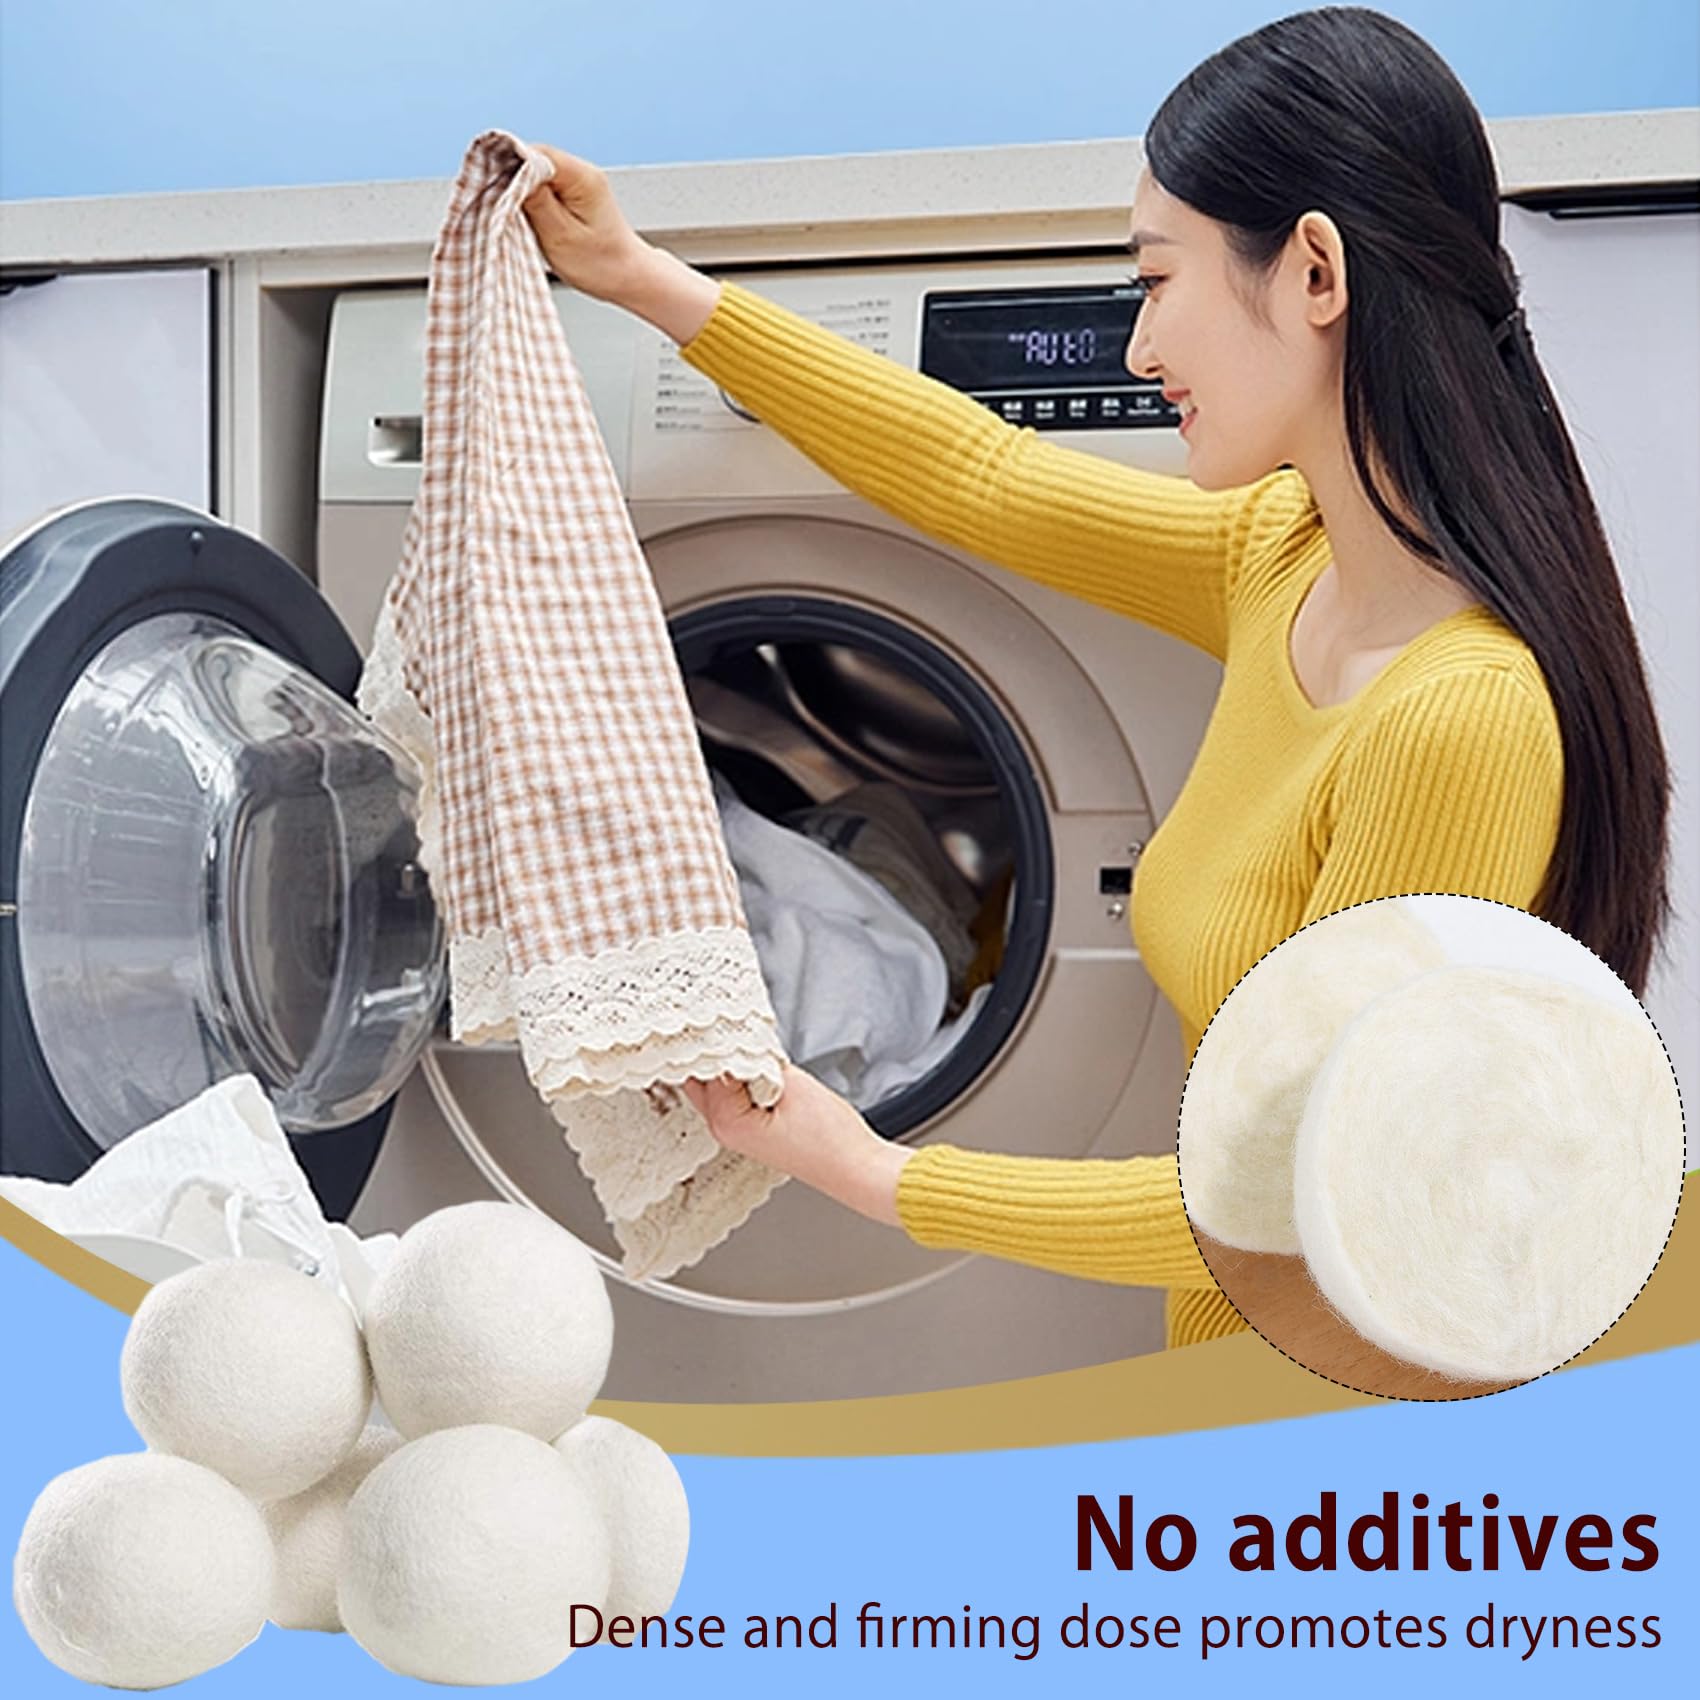 How to use wool dryer balls?